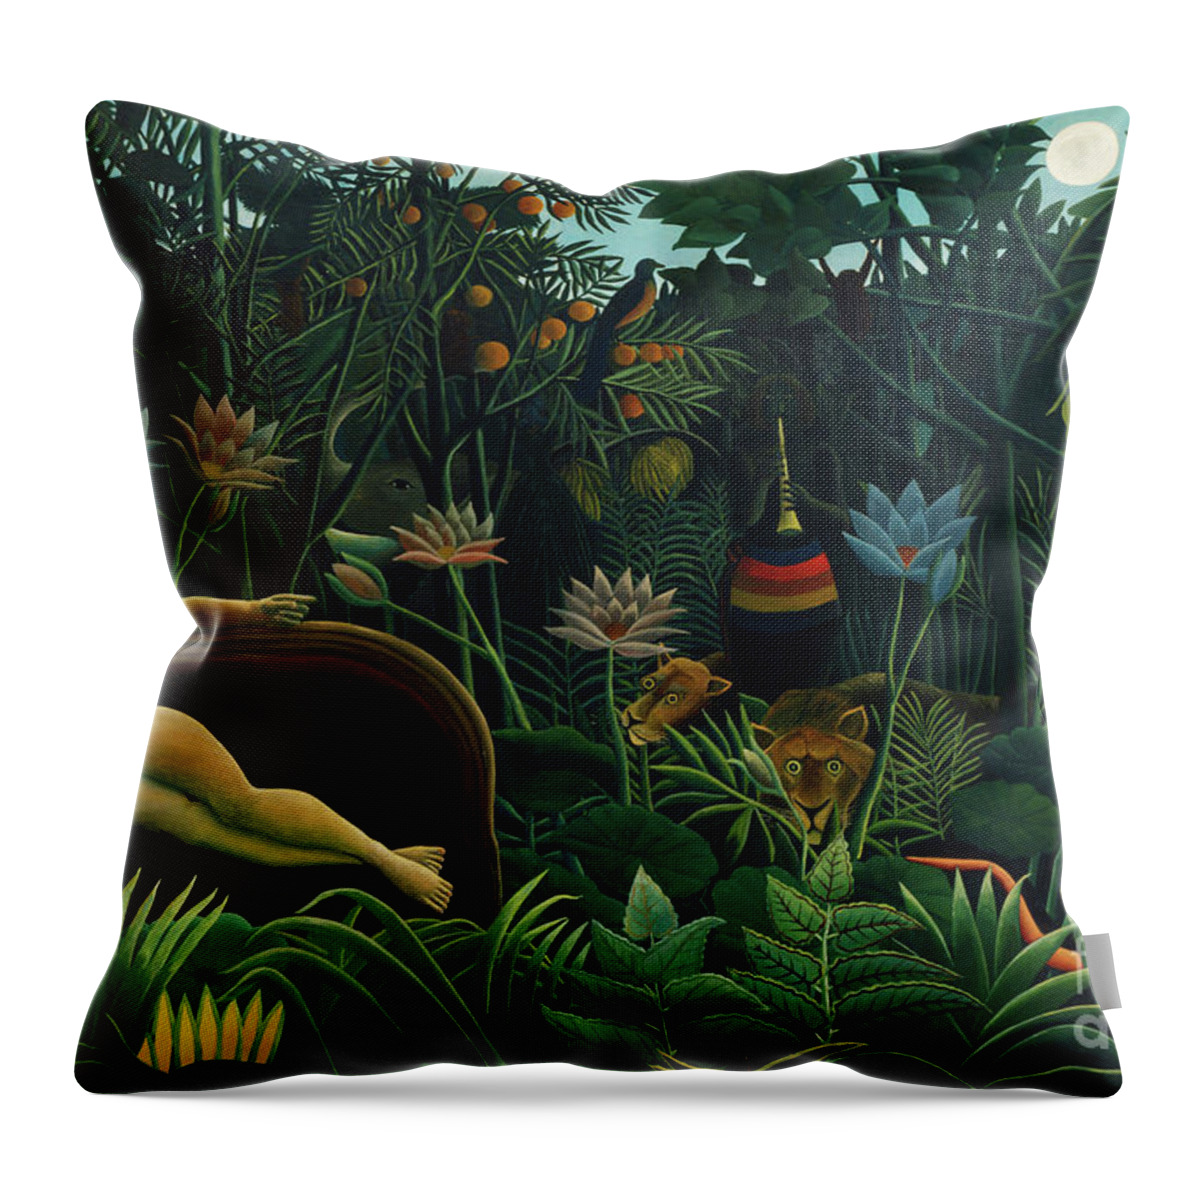 Wingsdomain Throw Pillow featuring the painting Remastered Art The Dream by Henri Rousseau 20220108a by - Henri Rousseau